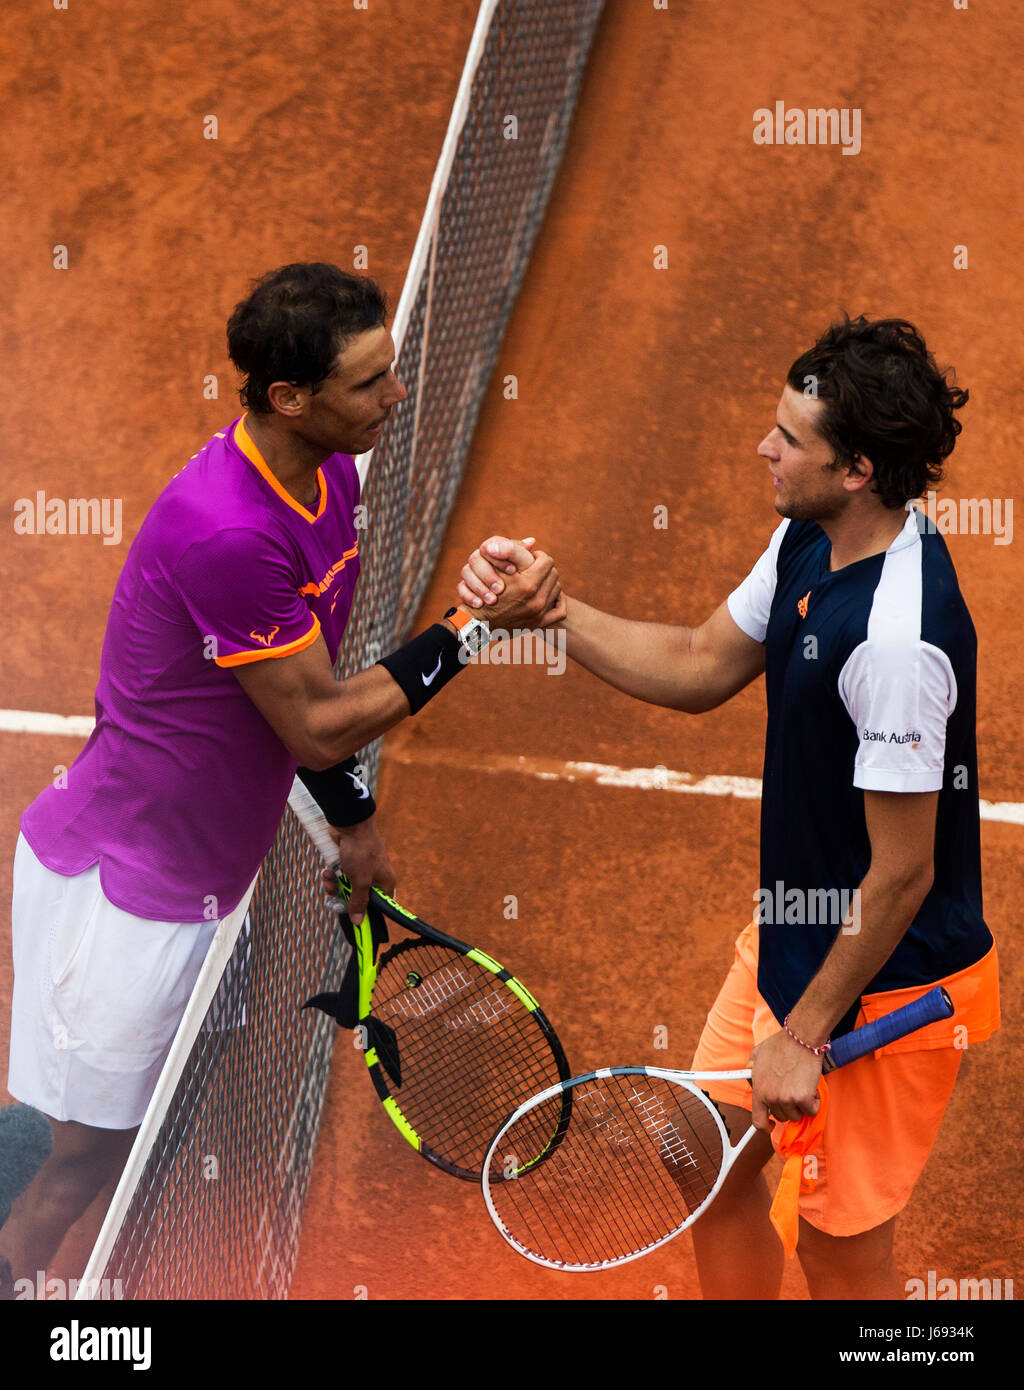 Rome, Italy. 19th May, 2017. Rafael Nadal (L) of Spain shakes hands with  Dominic Thiem of Austria during the quarterfinal match of men's singles at  the Italian Open tennis tournament in Rome,